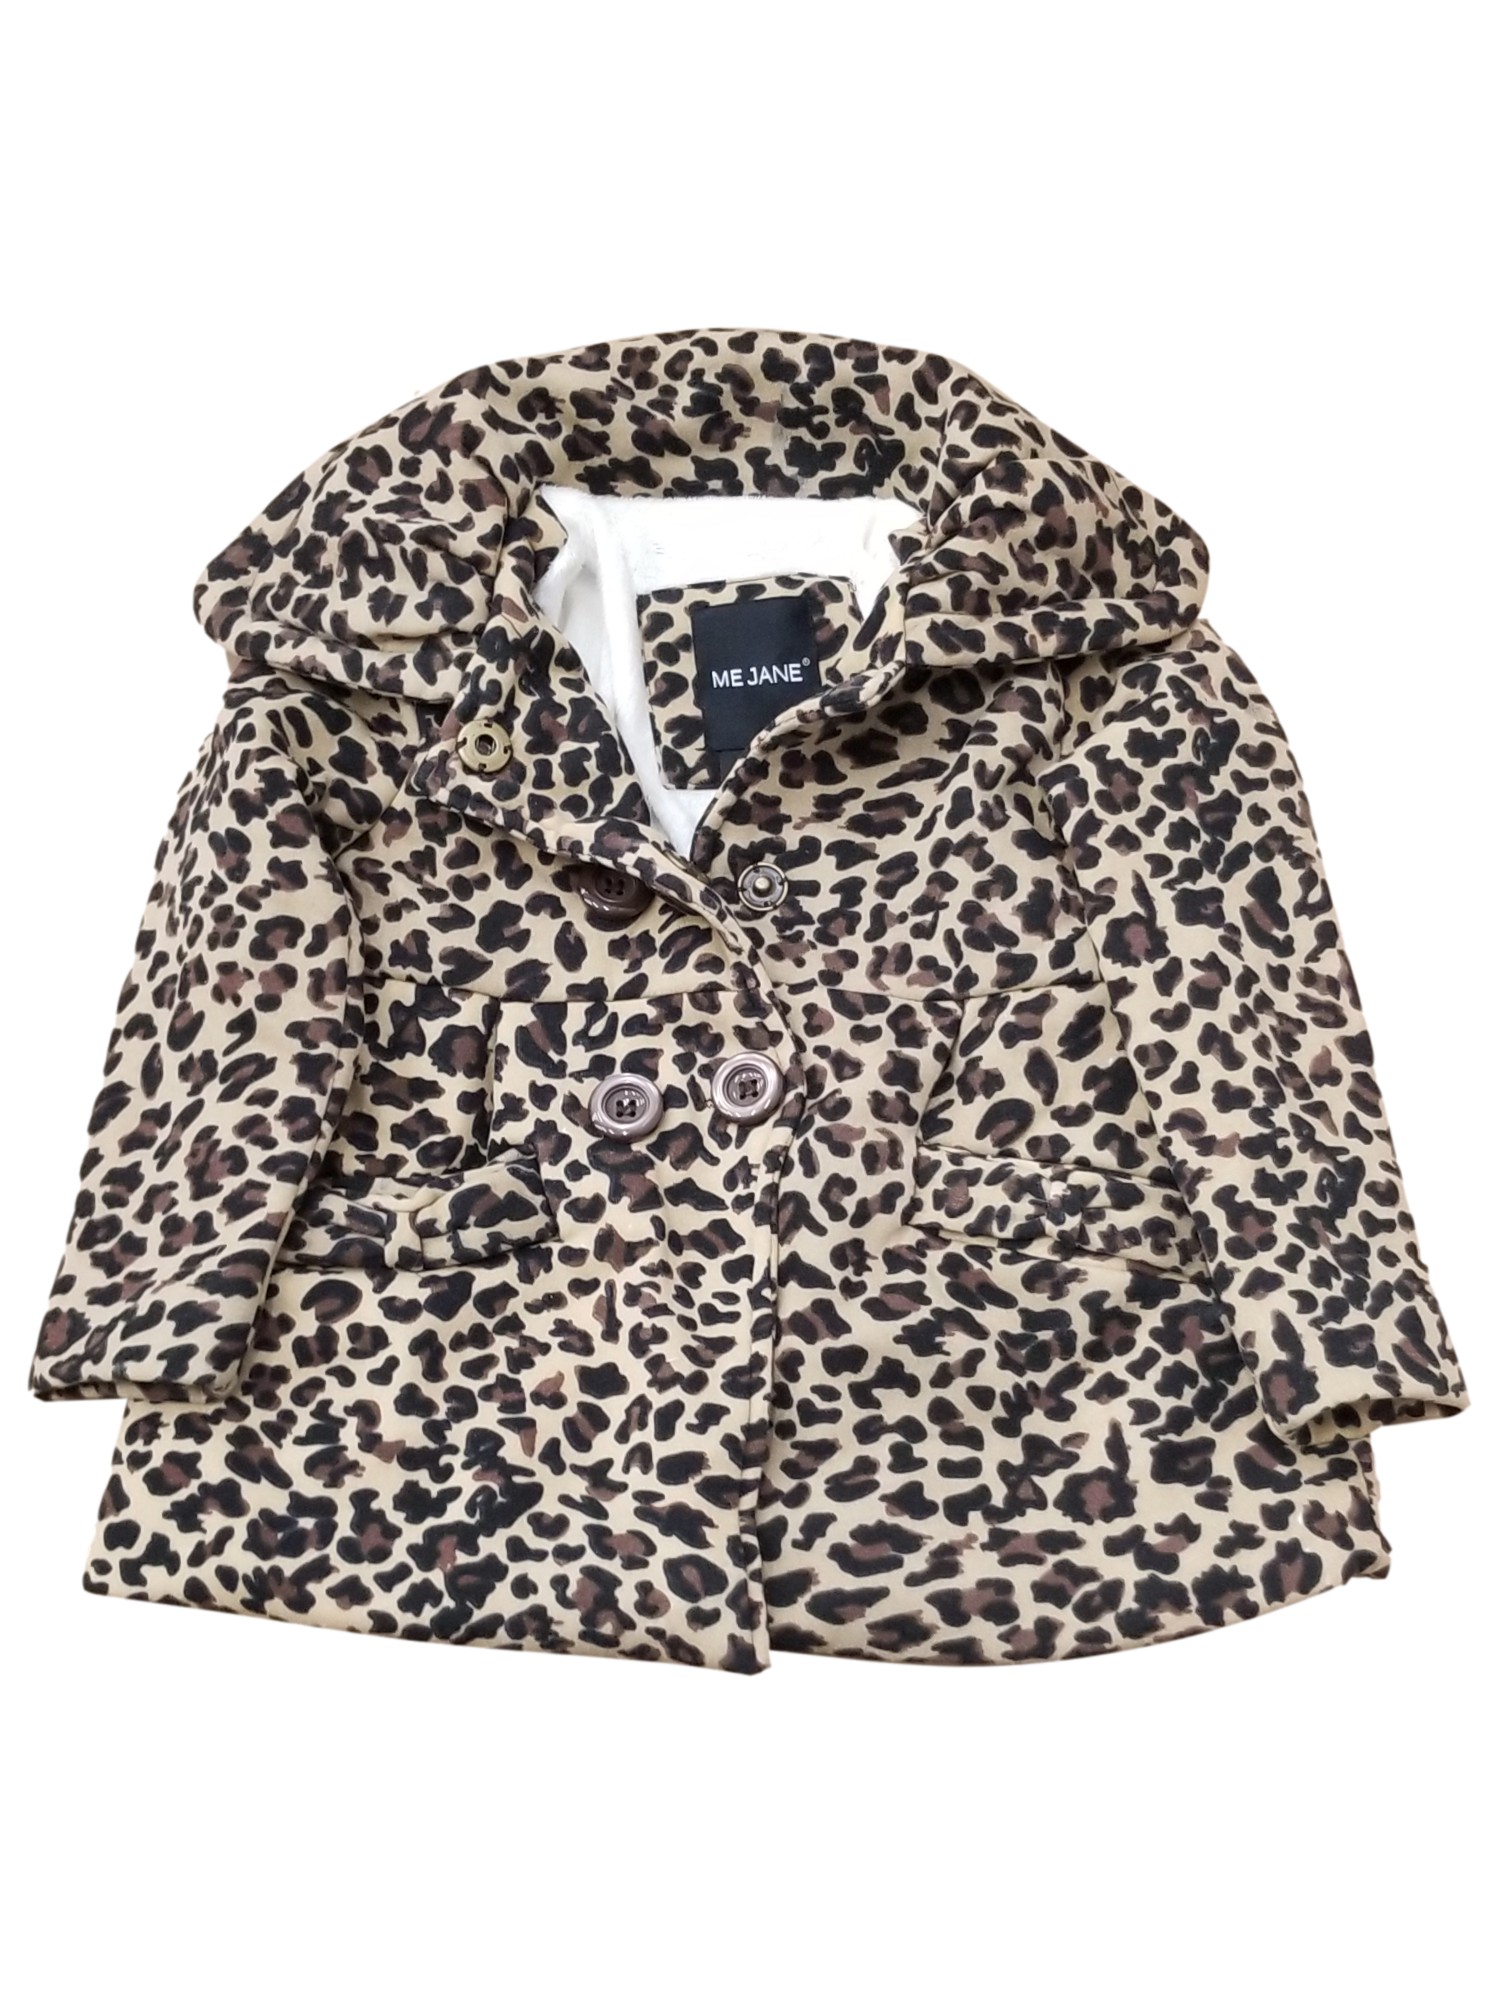 Toddler Girls Tan Leopard Print Button Up Pea Coat Jacket Faux Fur Lining 3T - image 2 of 2